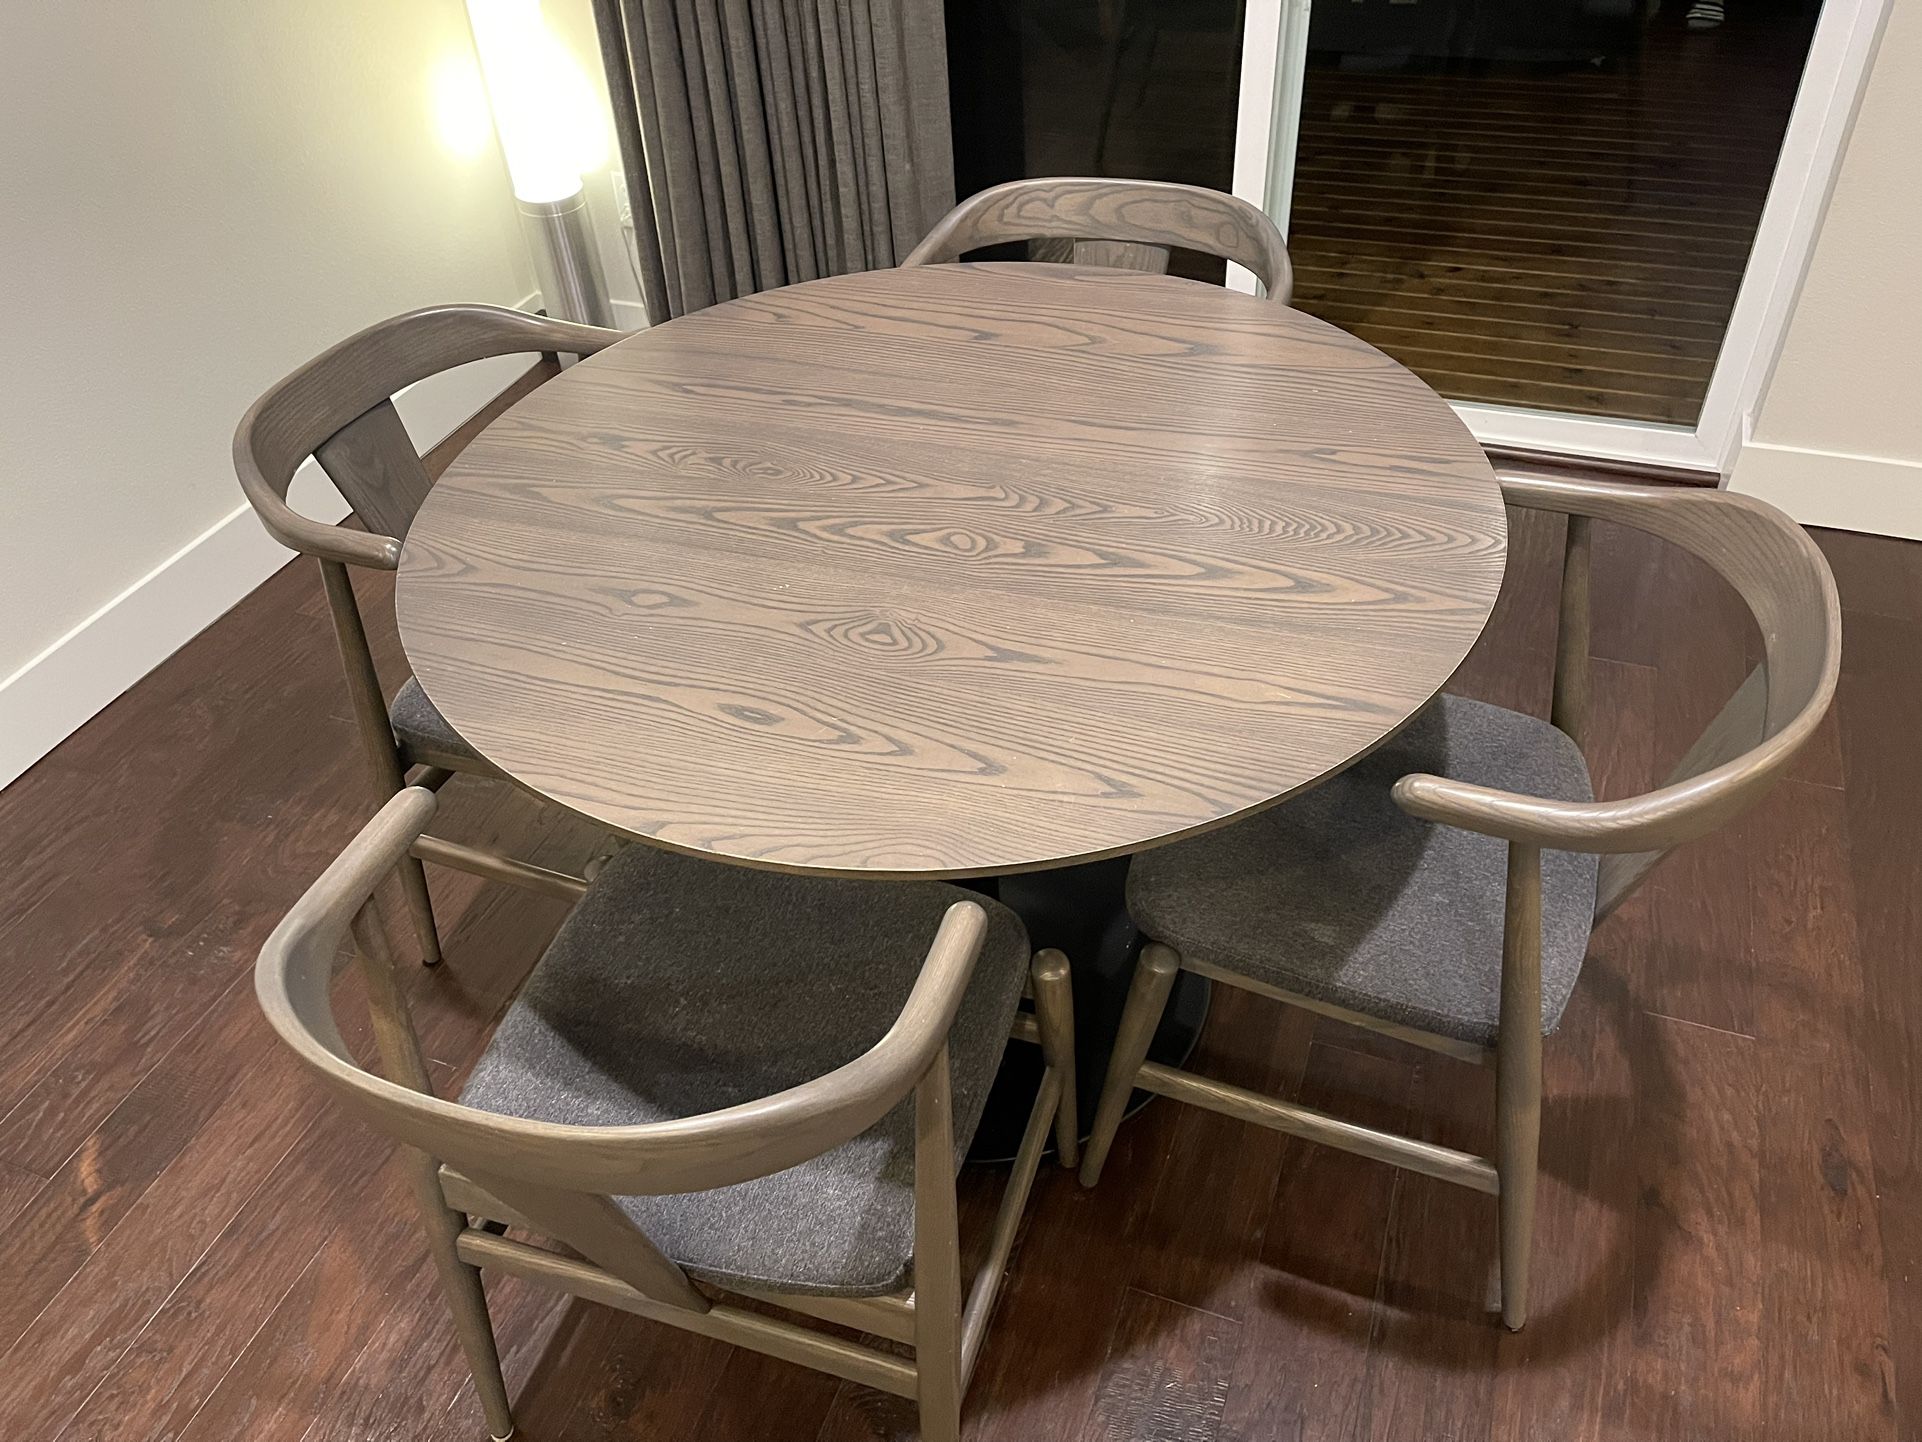 Room& Board Round Table With Arm Chairs In Flint Fabric